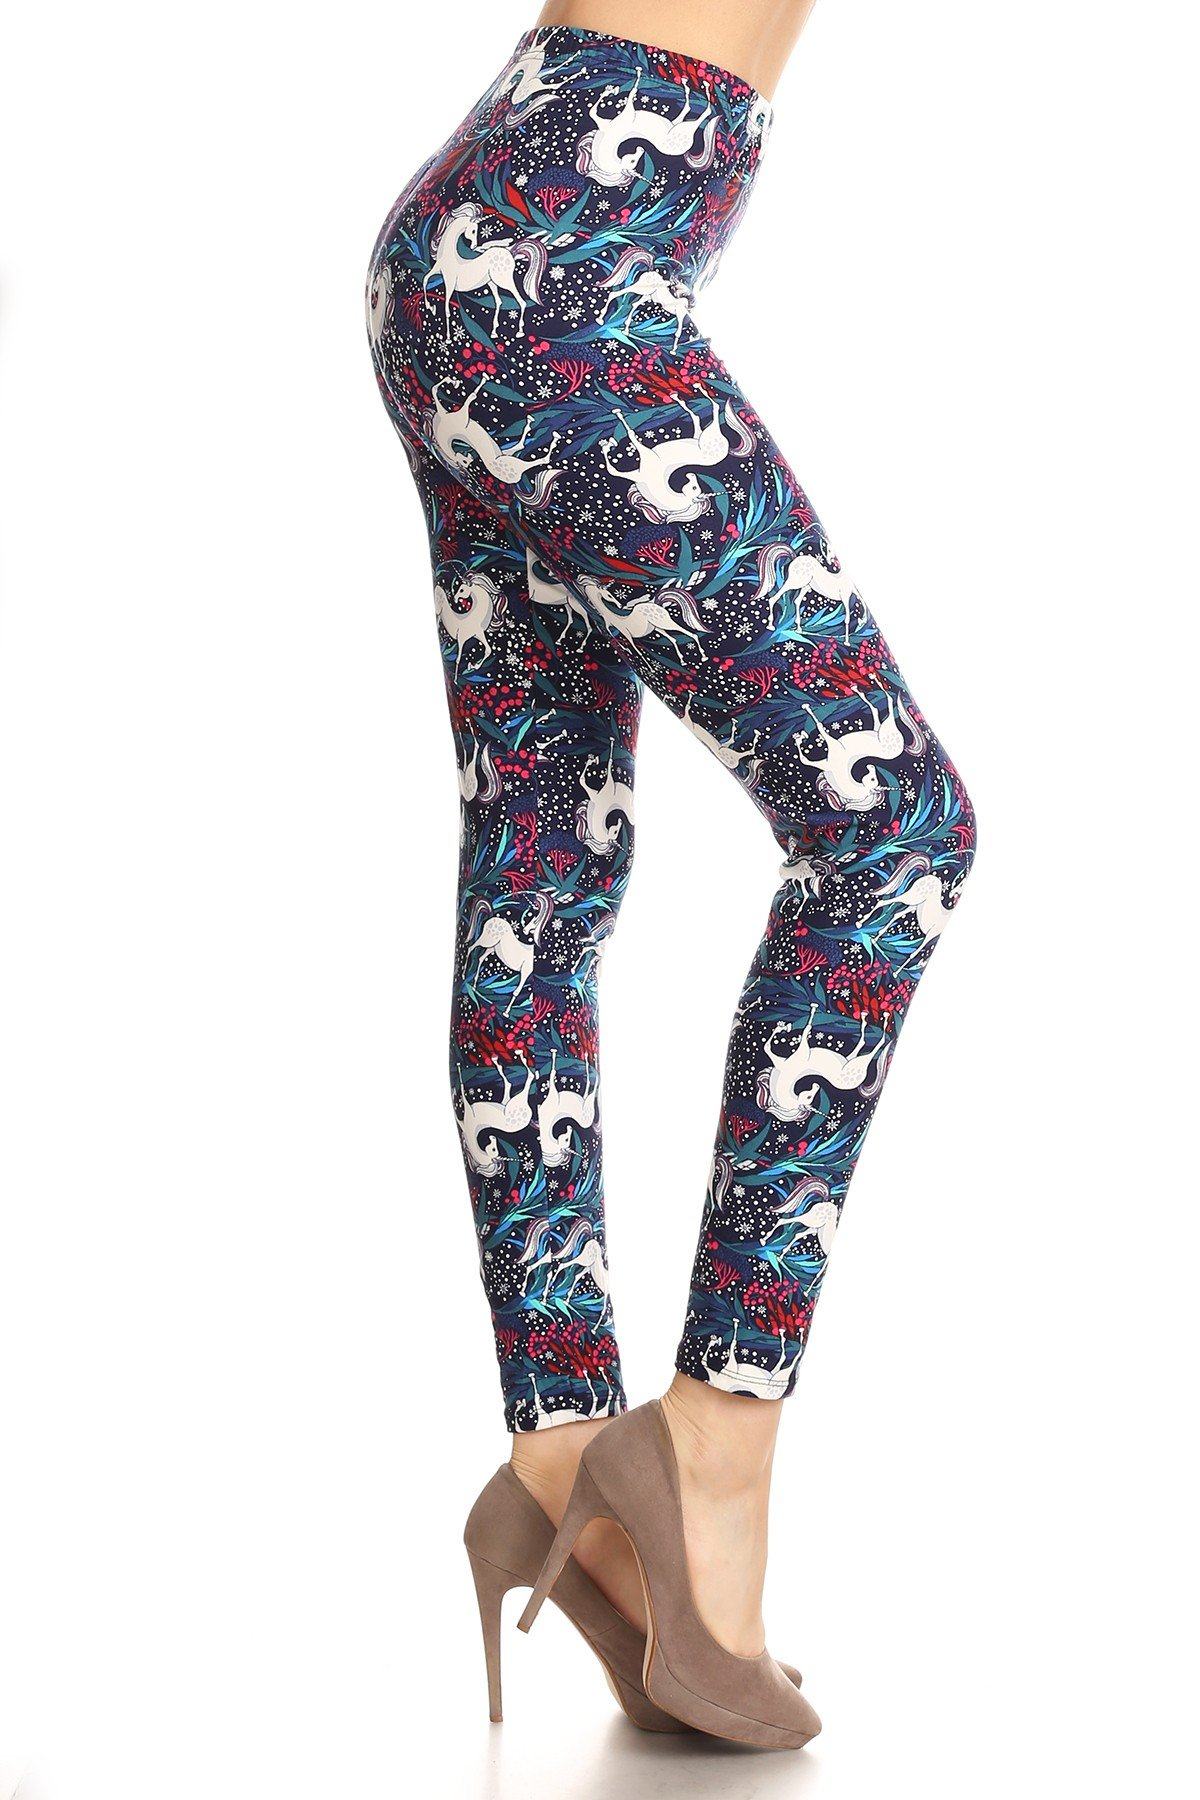 Women's Unicorn Printed Leggings Blue: OS and Plus Leggings MomMe and More 